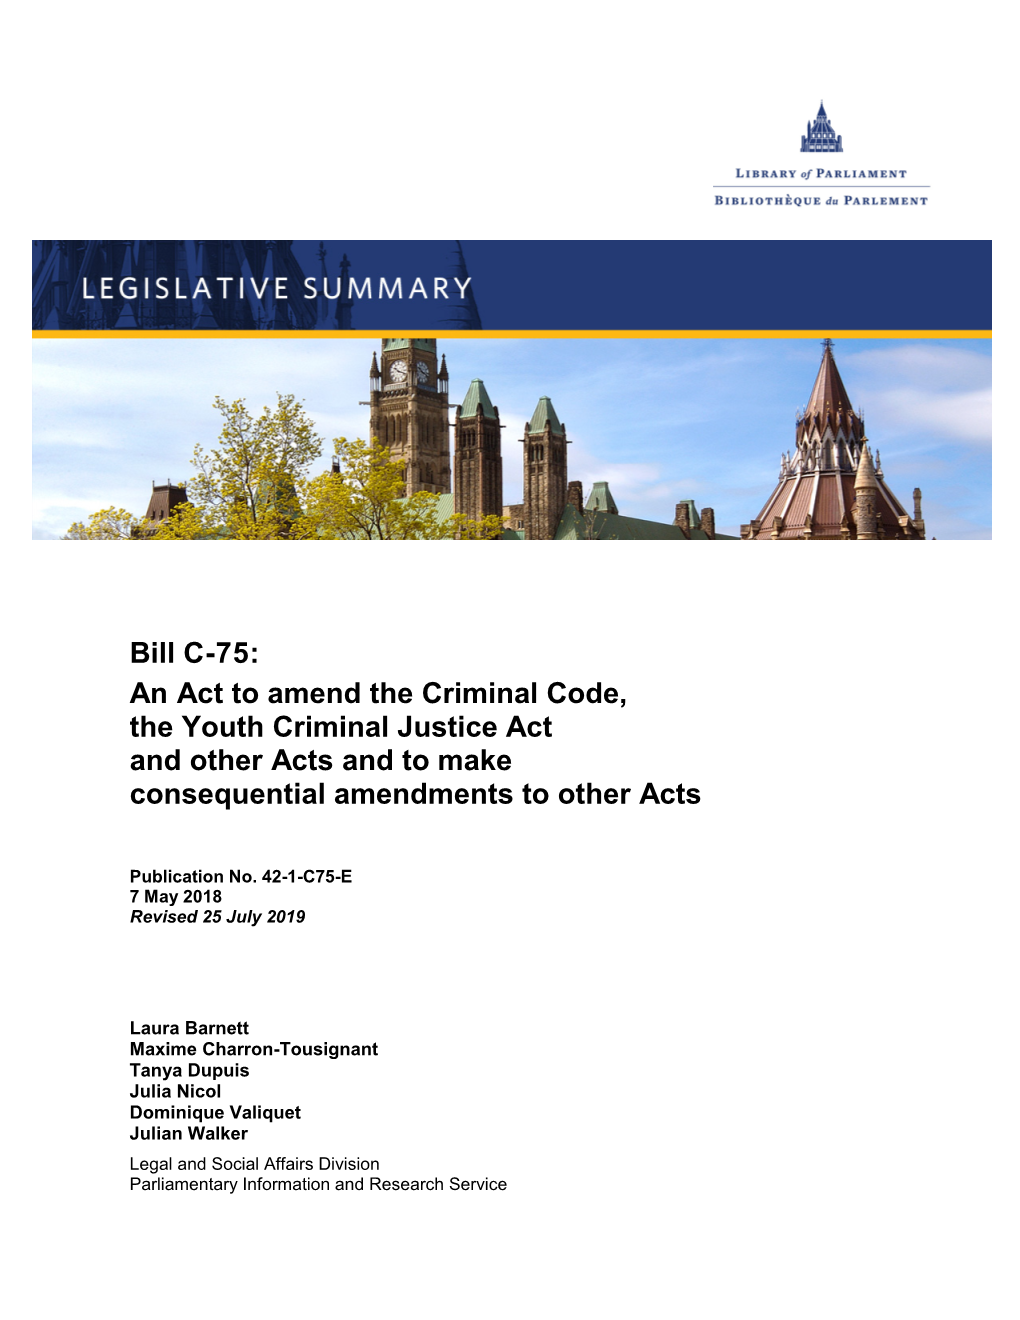 Bill C-75: an Act to Amend the Criminal Code, the Youth Criminal Justice Act and Other Acts and to Make Consequential Amendments to Other Acts